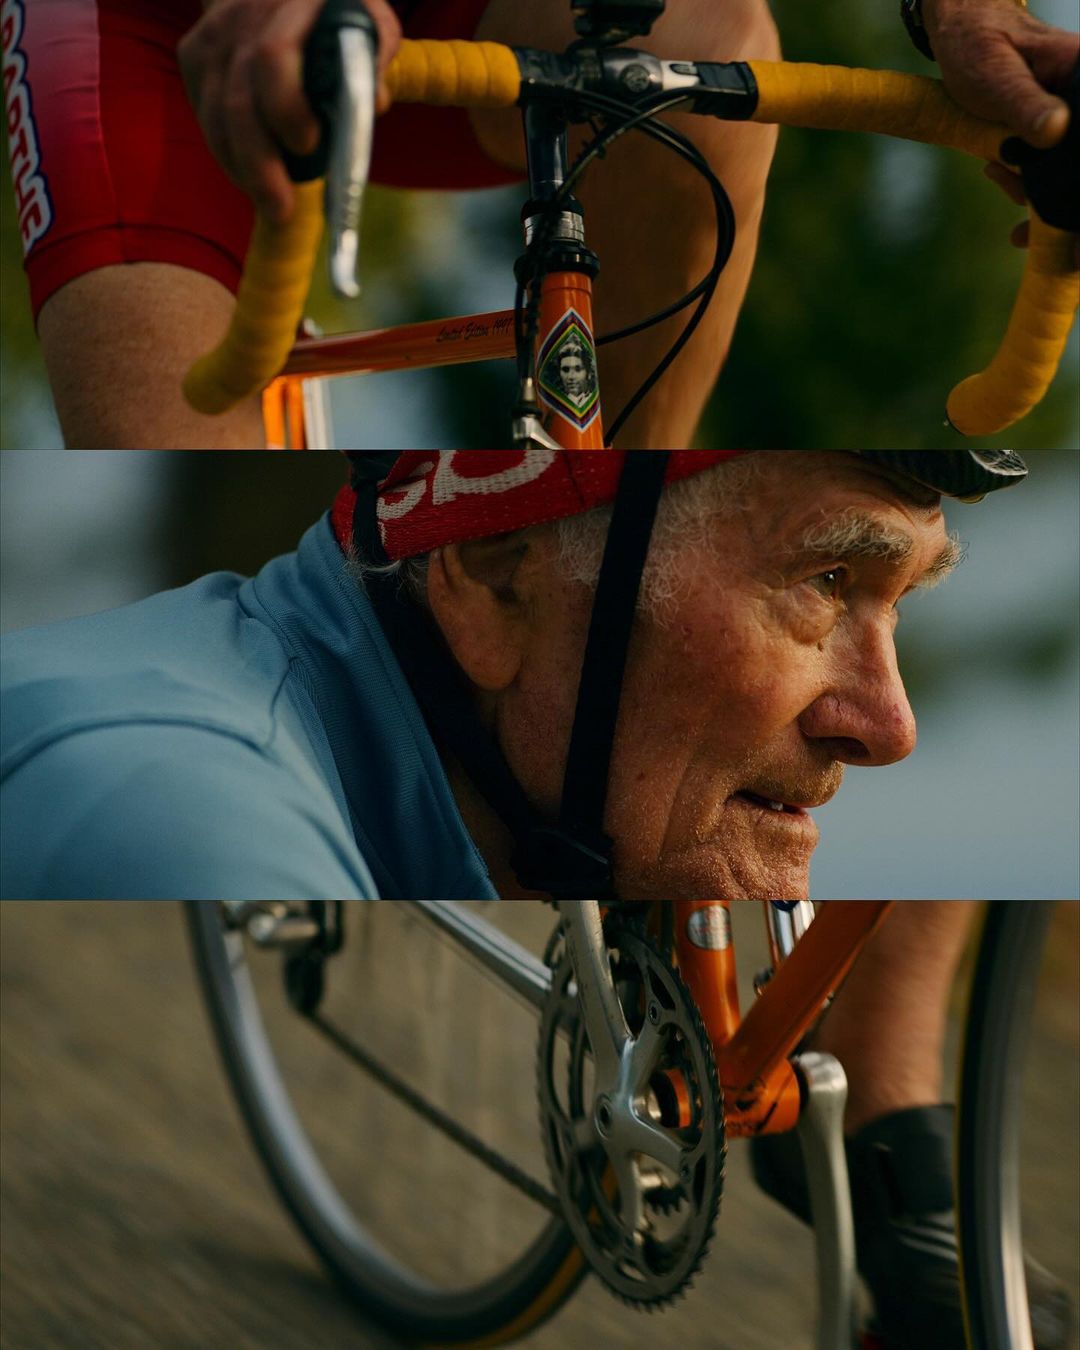 An Interview on the Cinematography of 'The 90-Year-Old Cyclist’